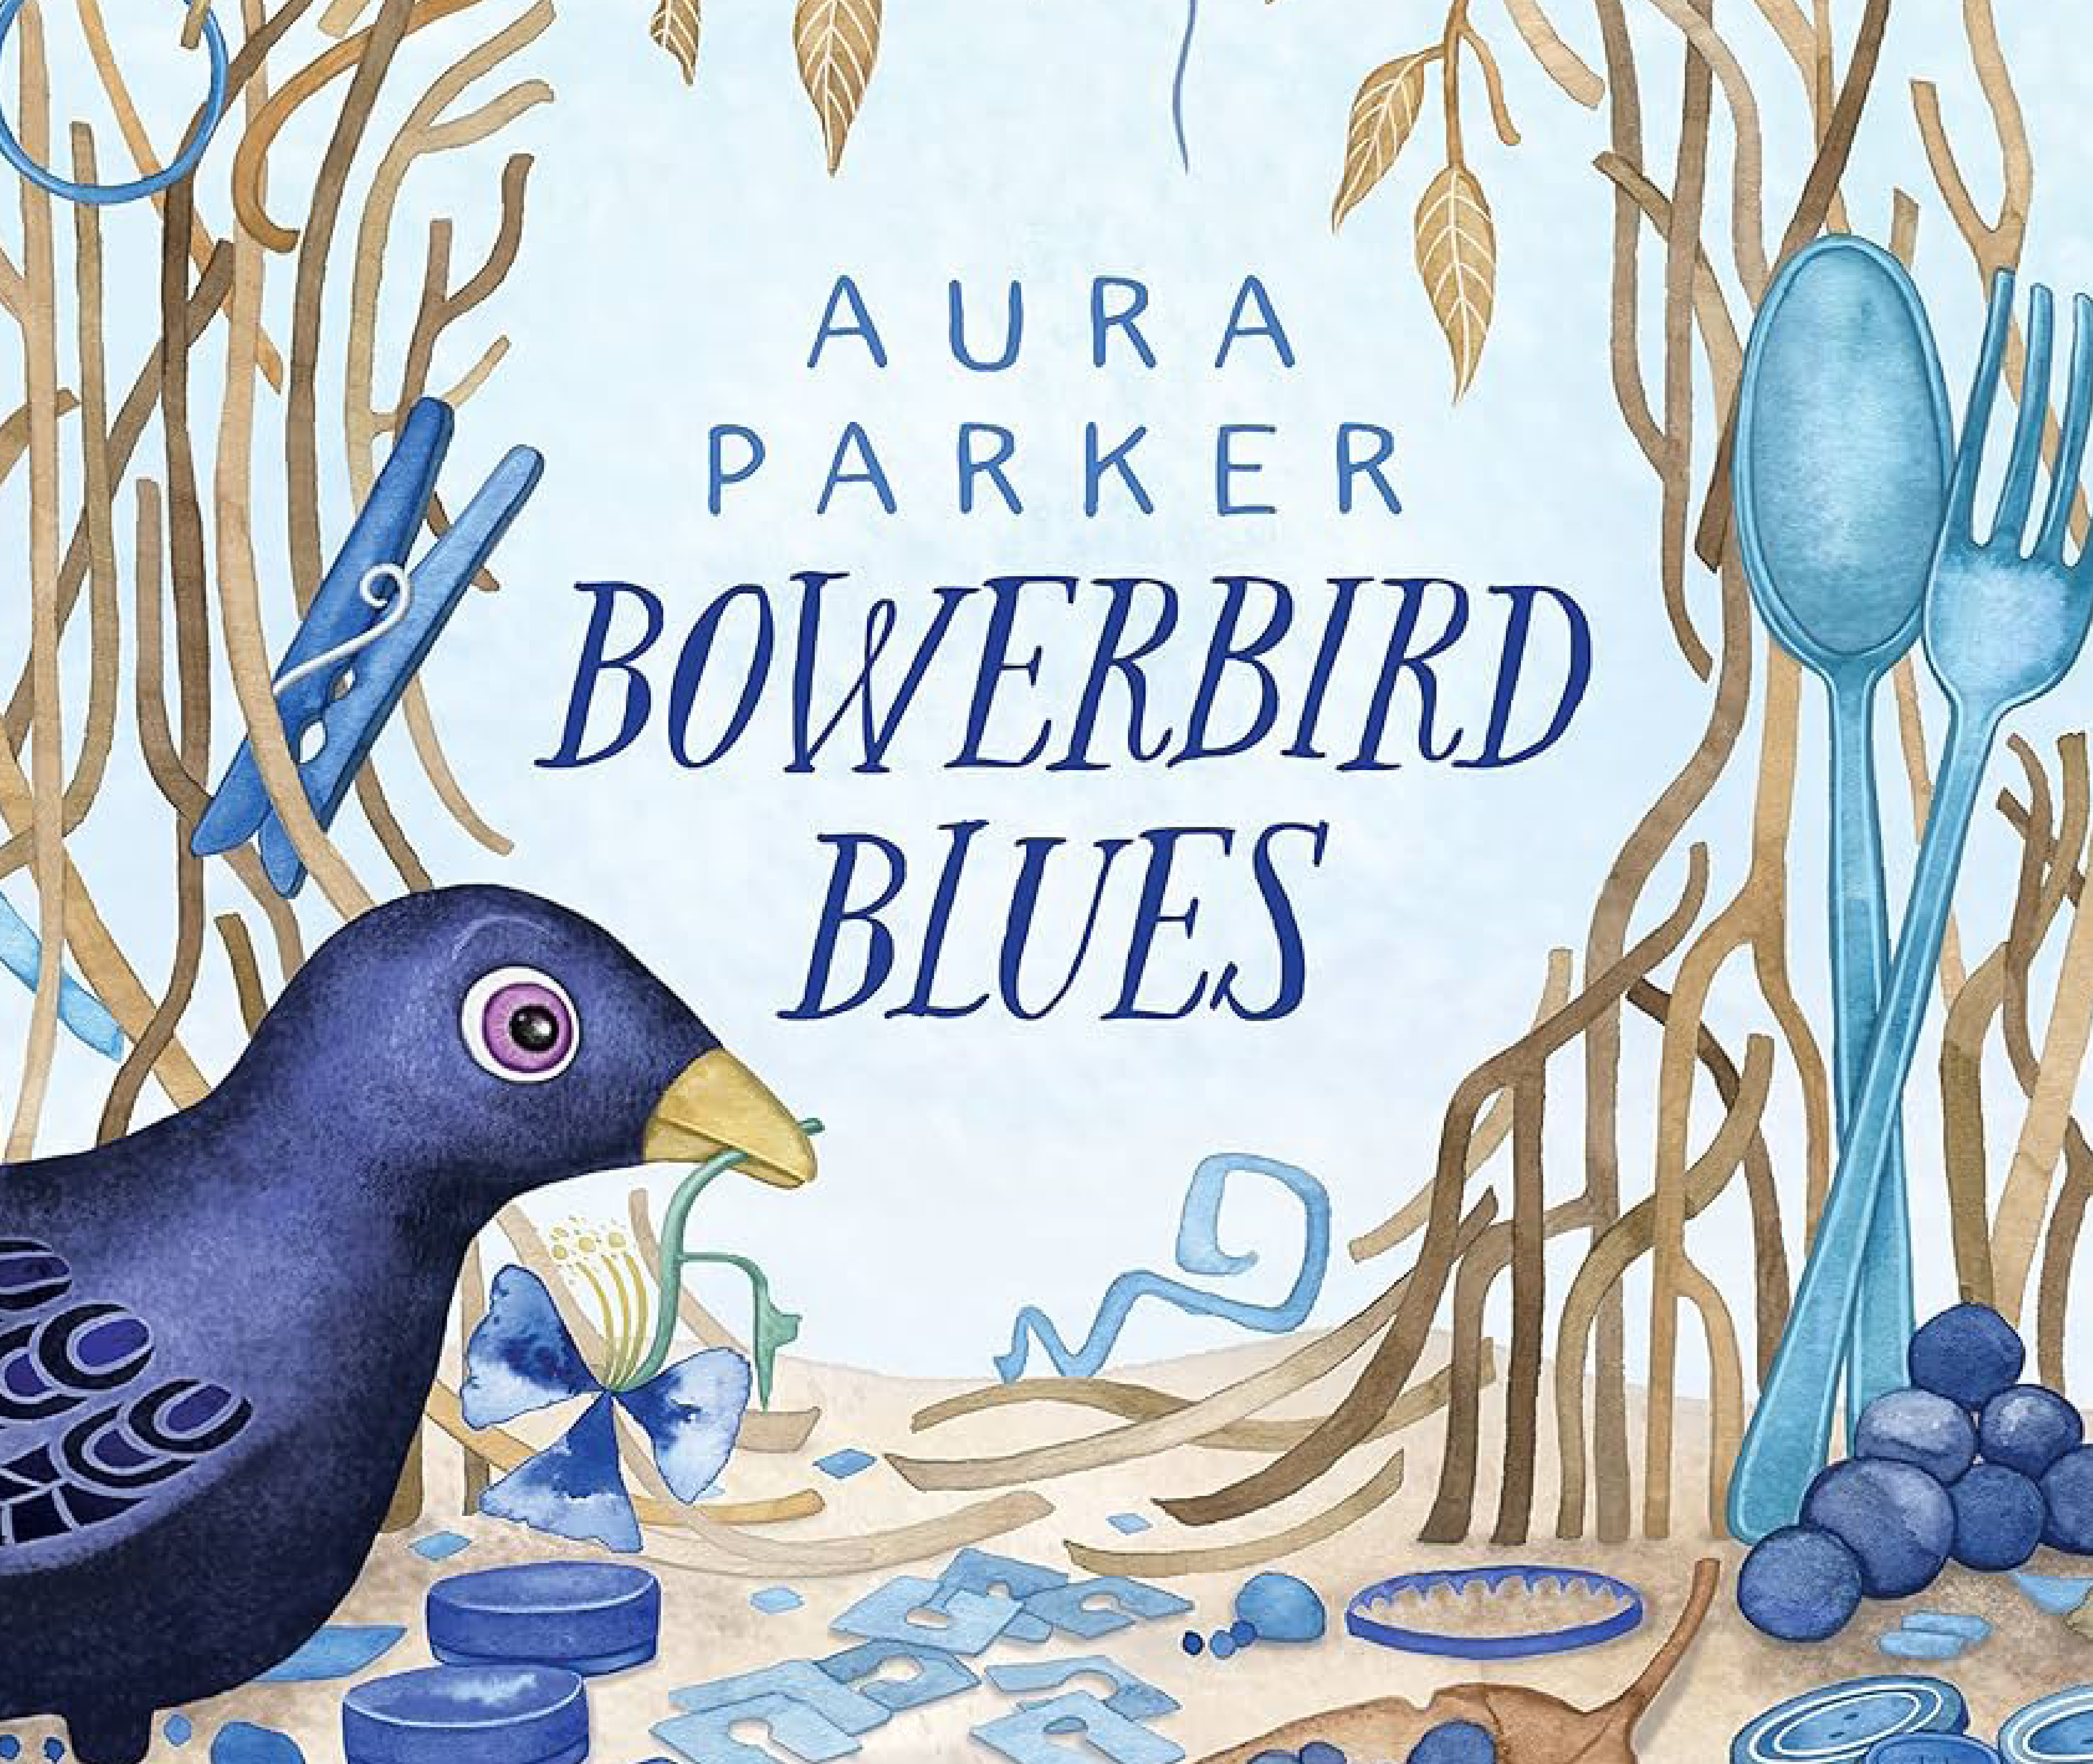 Join in with children across Australia as we read the brilliant picture book, Bowerbird Blues by Aura Parker.